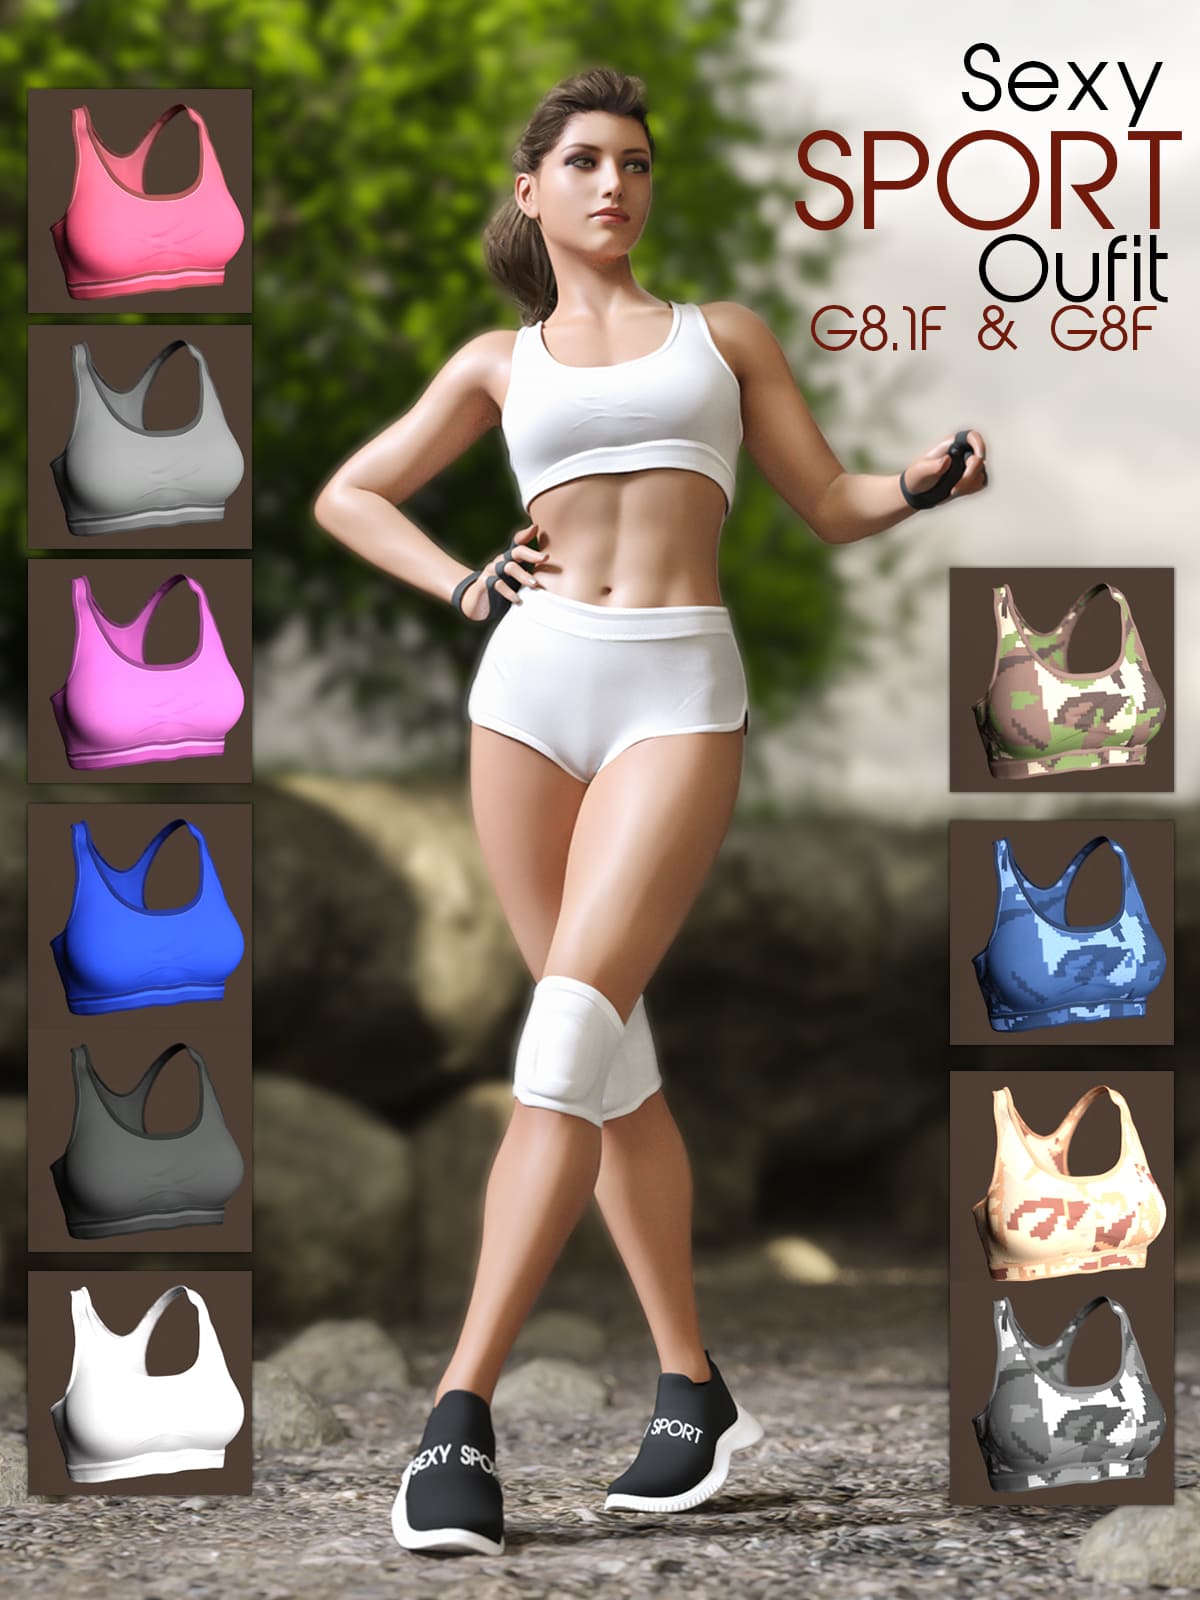 Sexy Sport Outfit For G8.1F & G8F_DAZ3D下载站